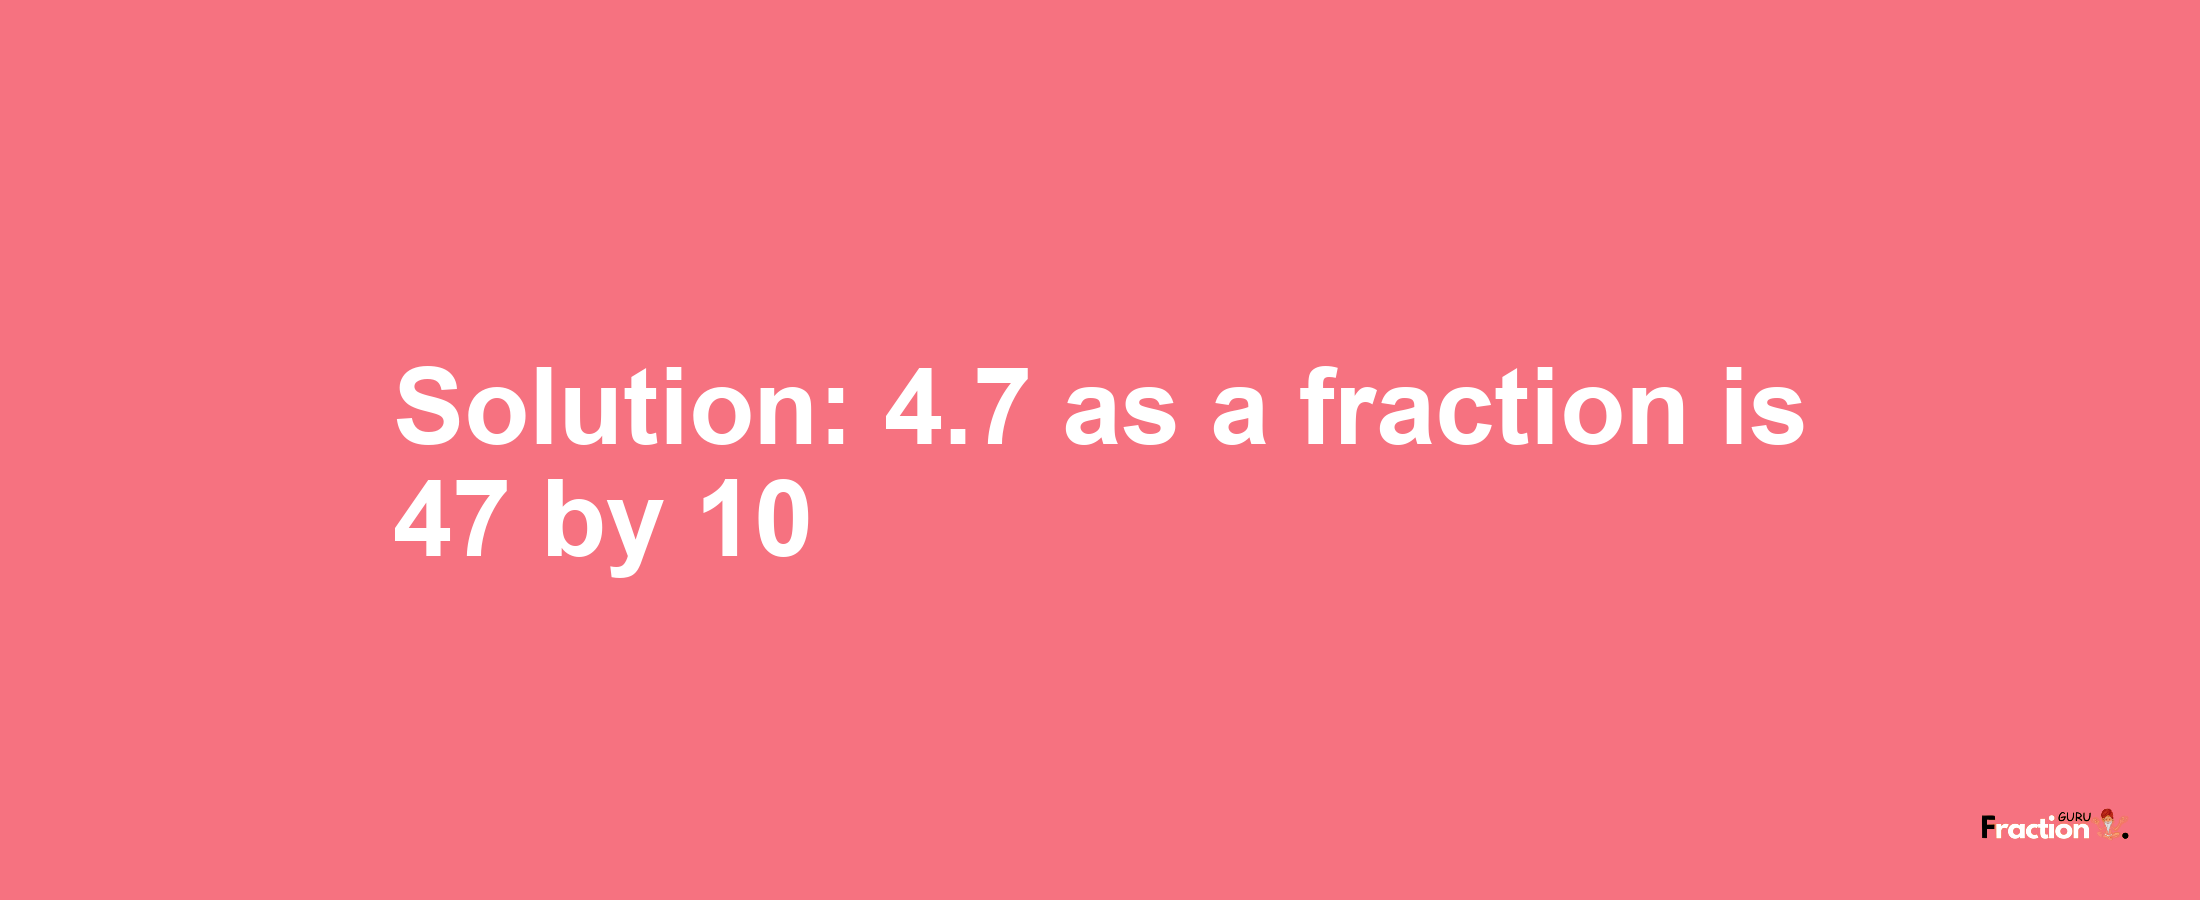 Solution:4.7 as a fraction is 47/10